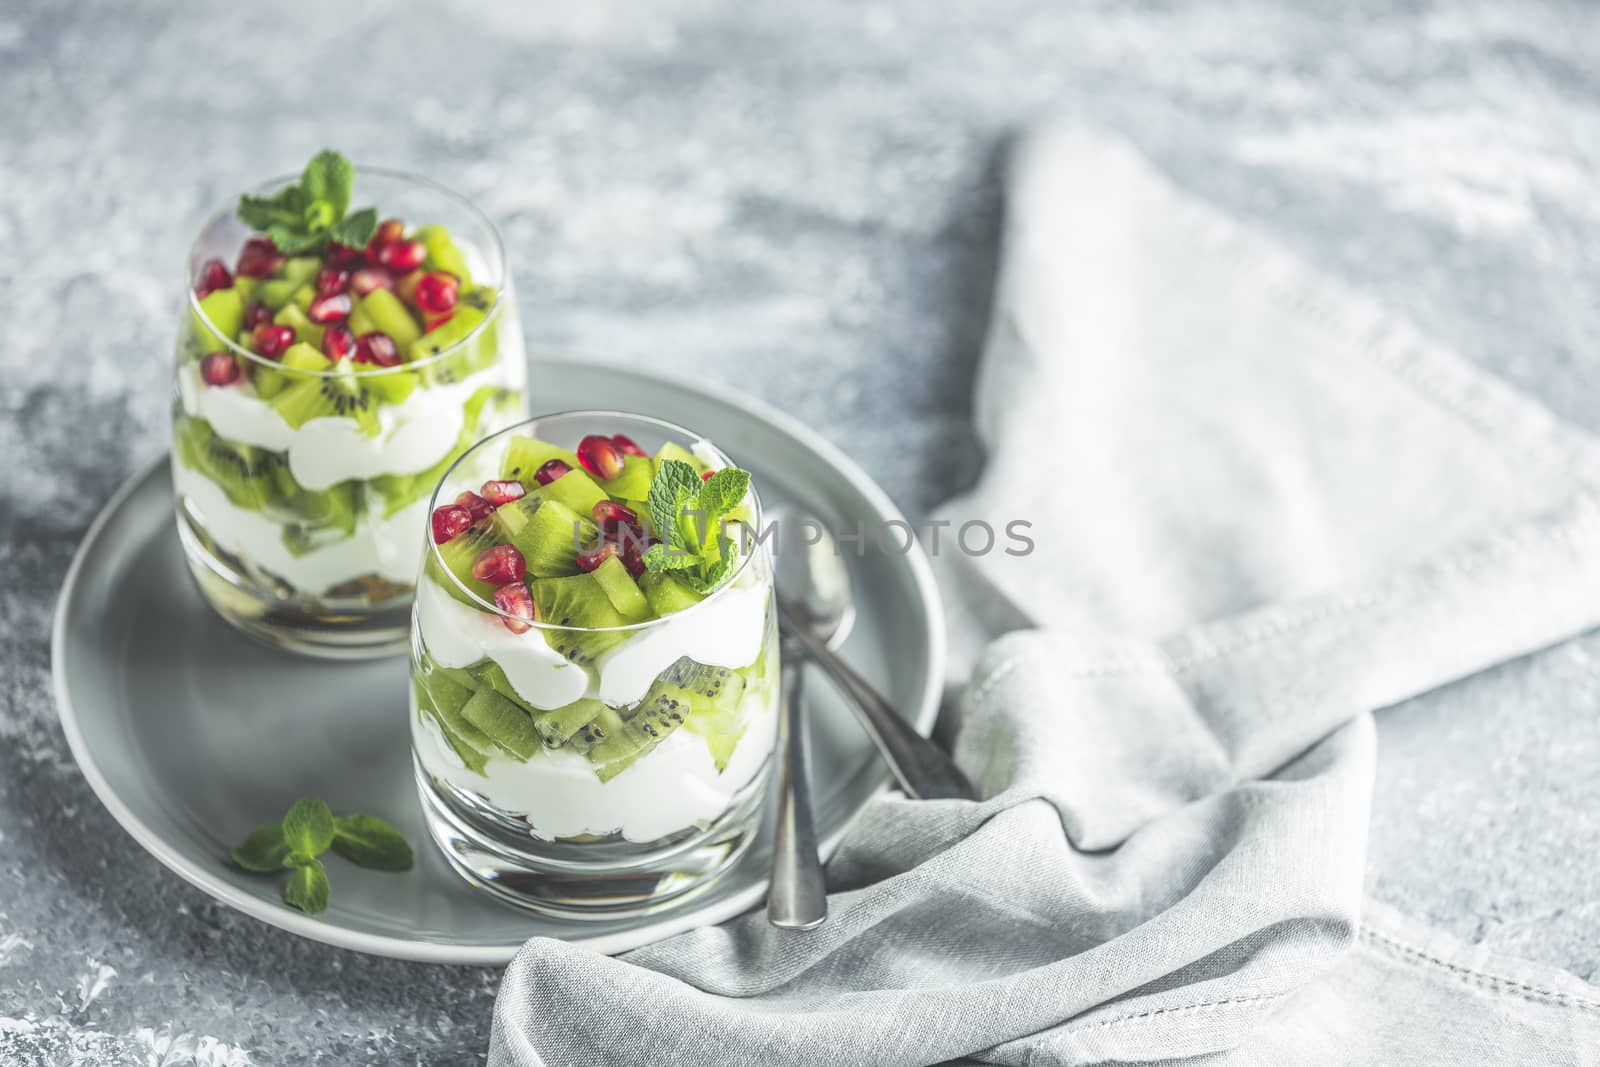 Two glasses healthy meal made of granola on gray plate, yogurt by ArtSvitlyna